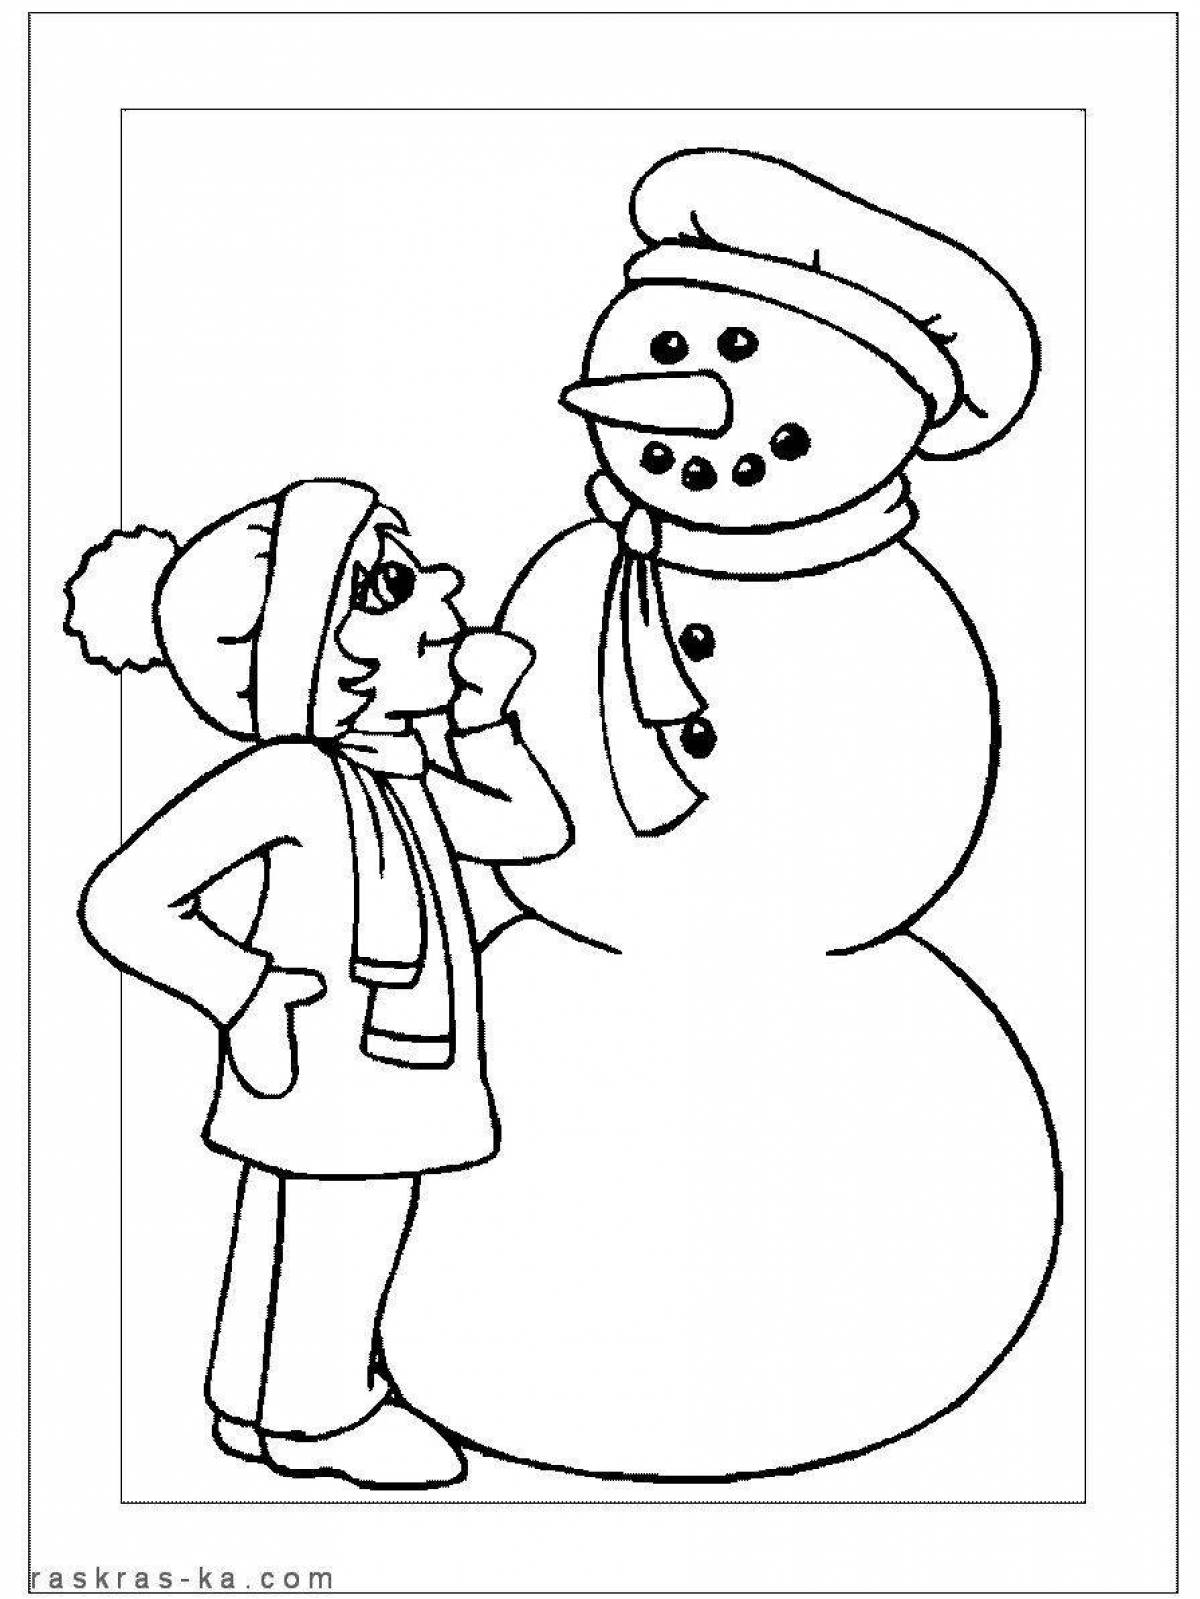 Adorable snowman girl coloring page